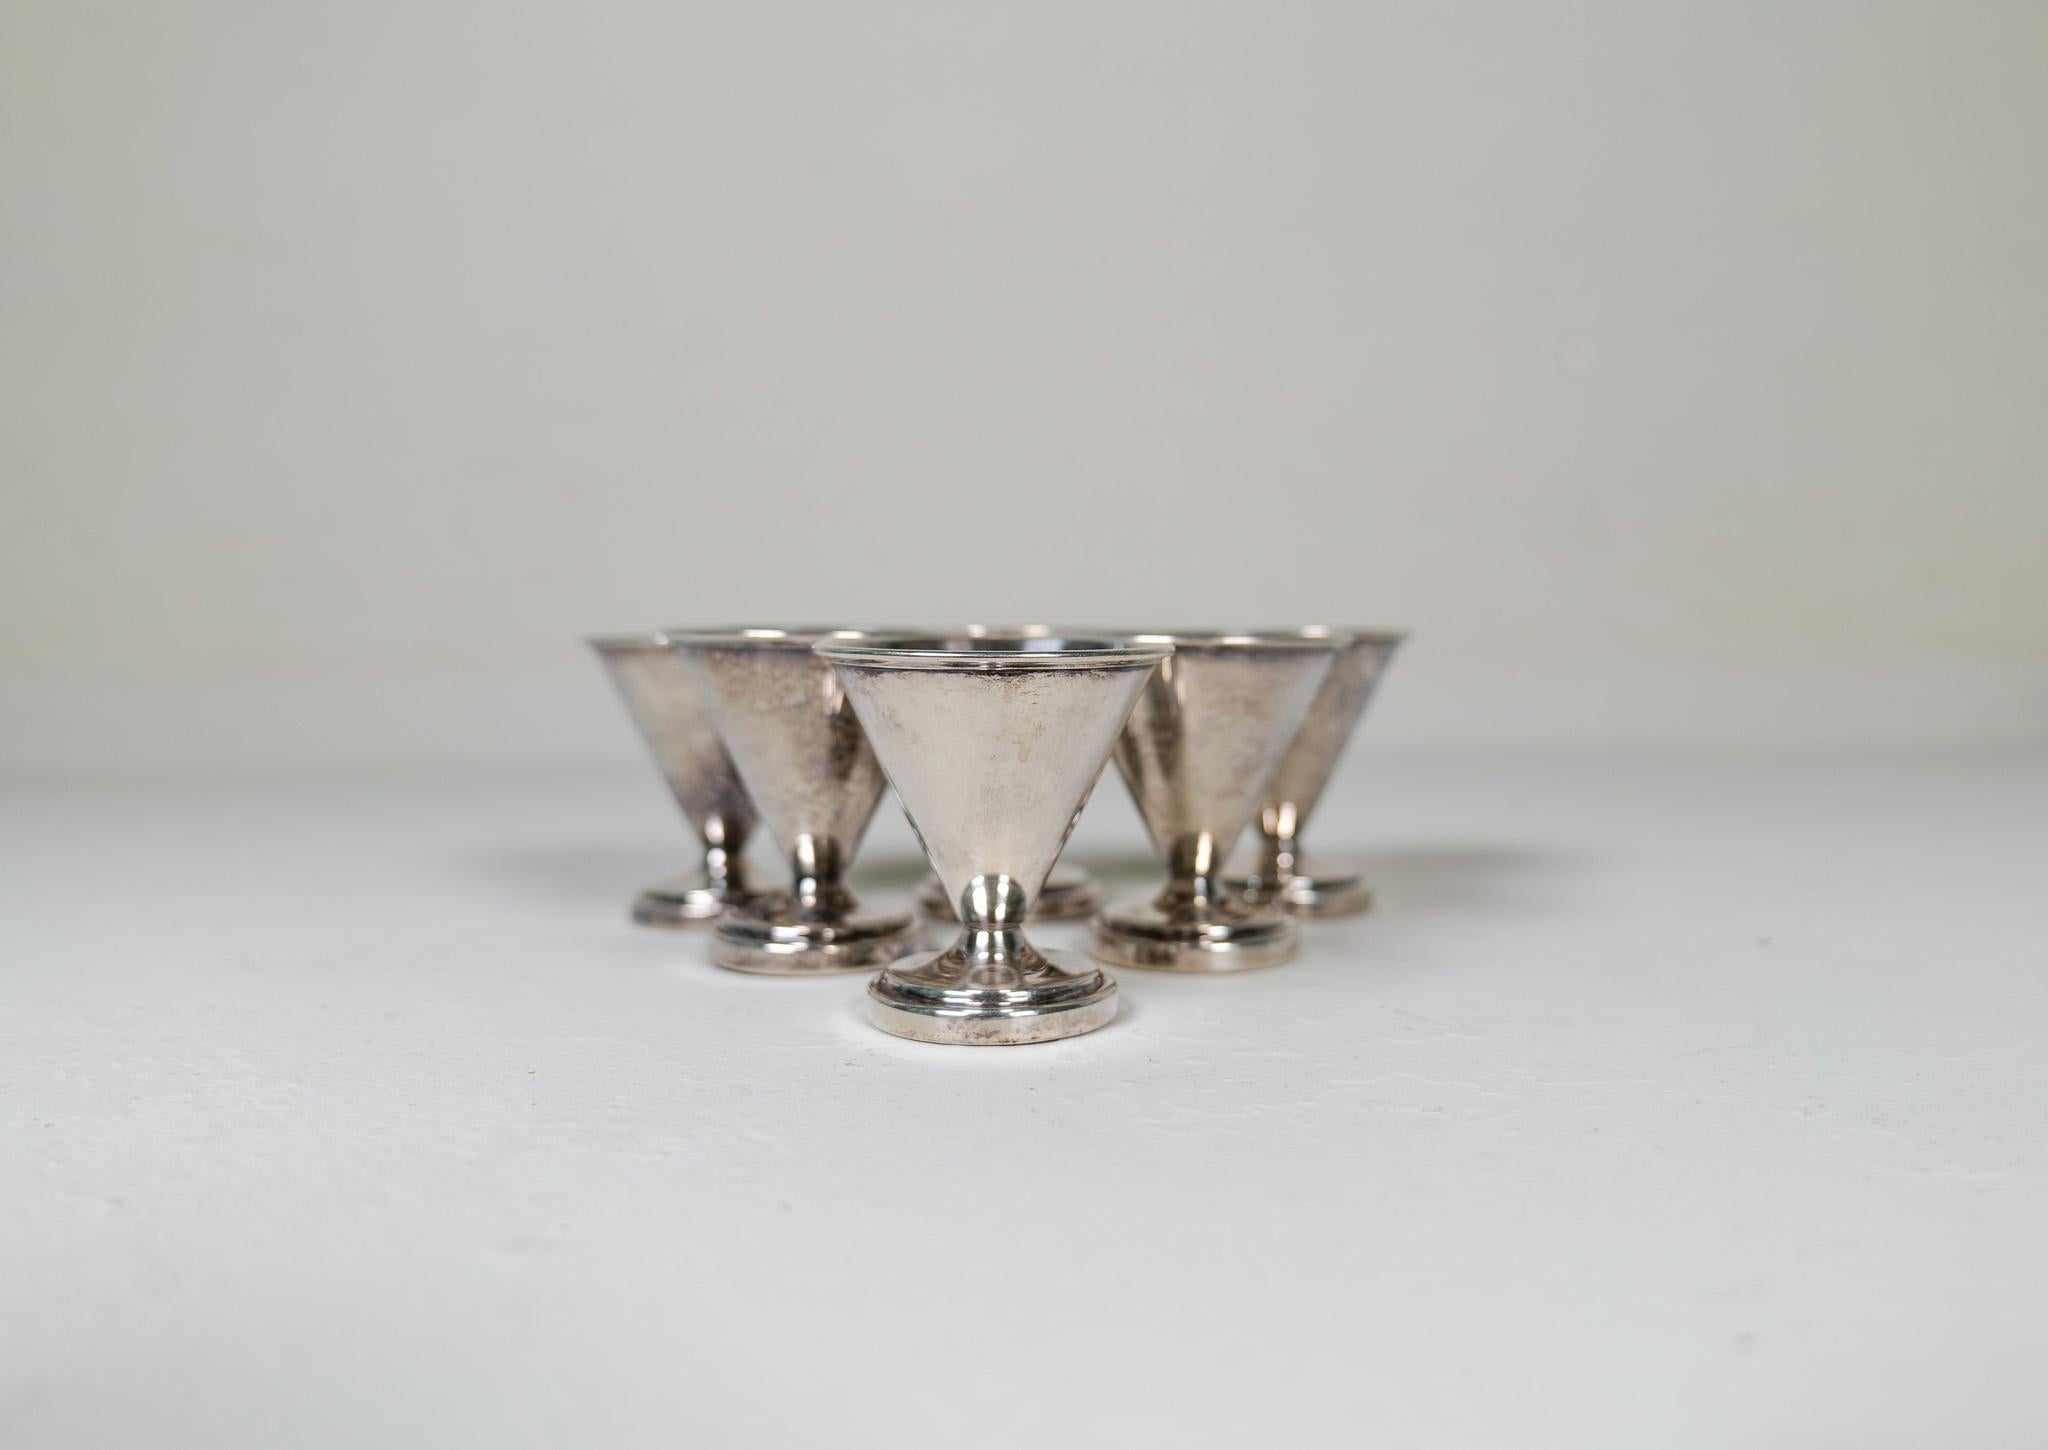 Art Deco Cocktail Shaker with 6 Small Glasses by Folke Arström, Sweden For Sale 4